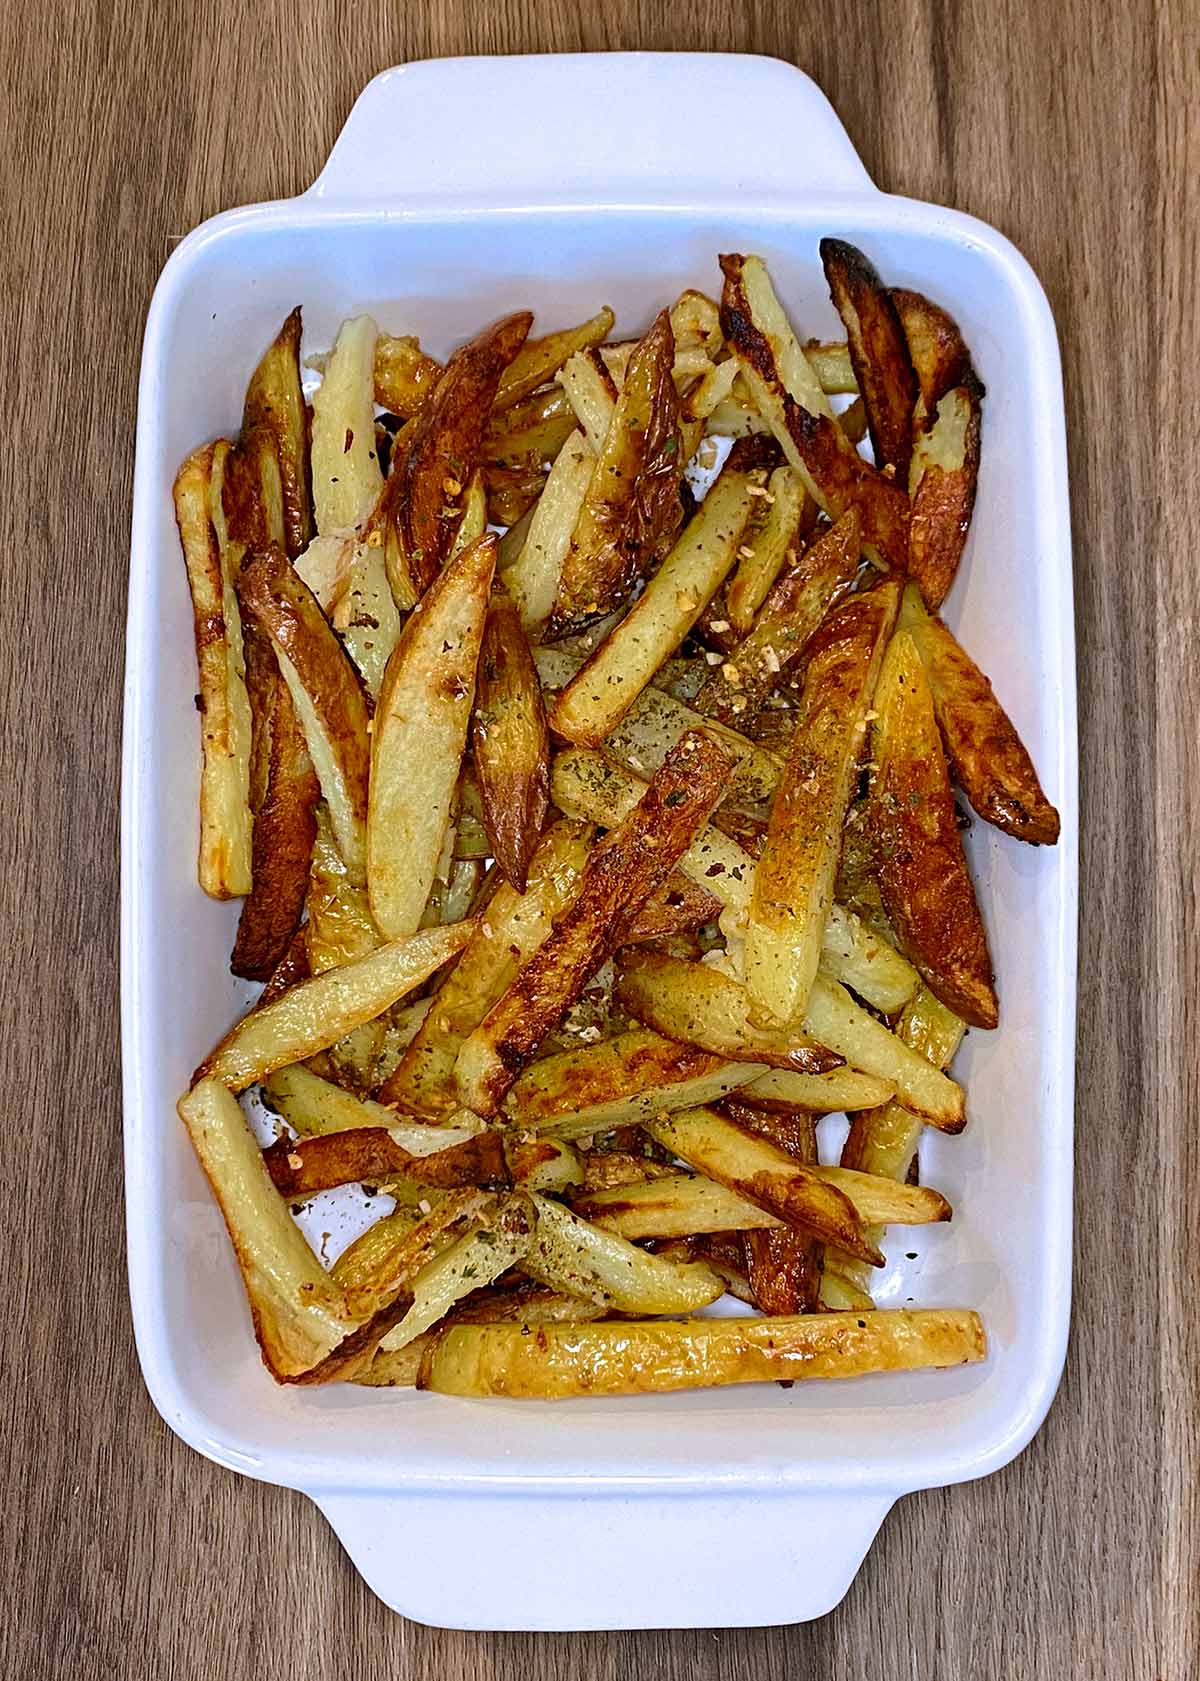 Cooked chips in a rectangular baking dish.